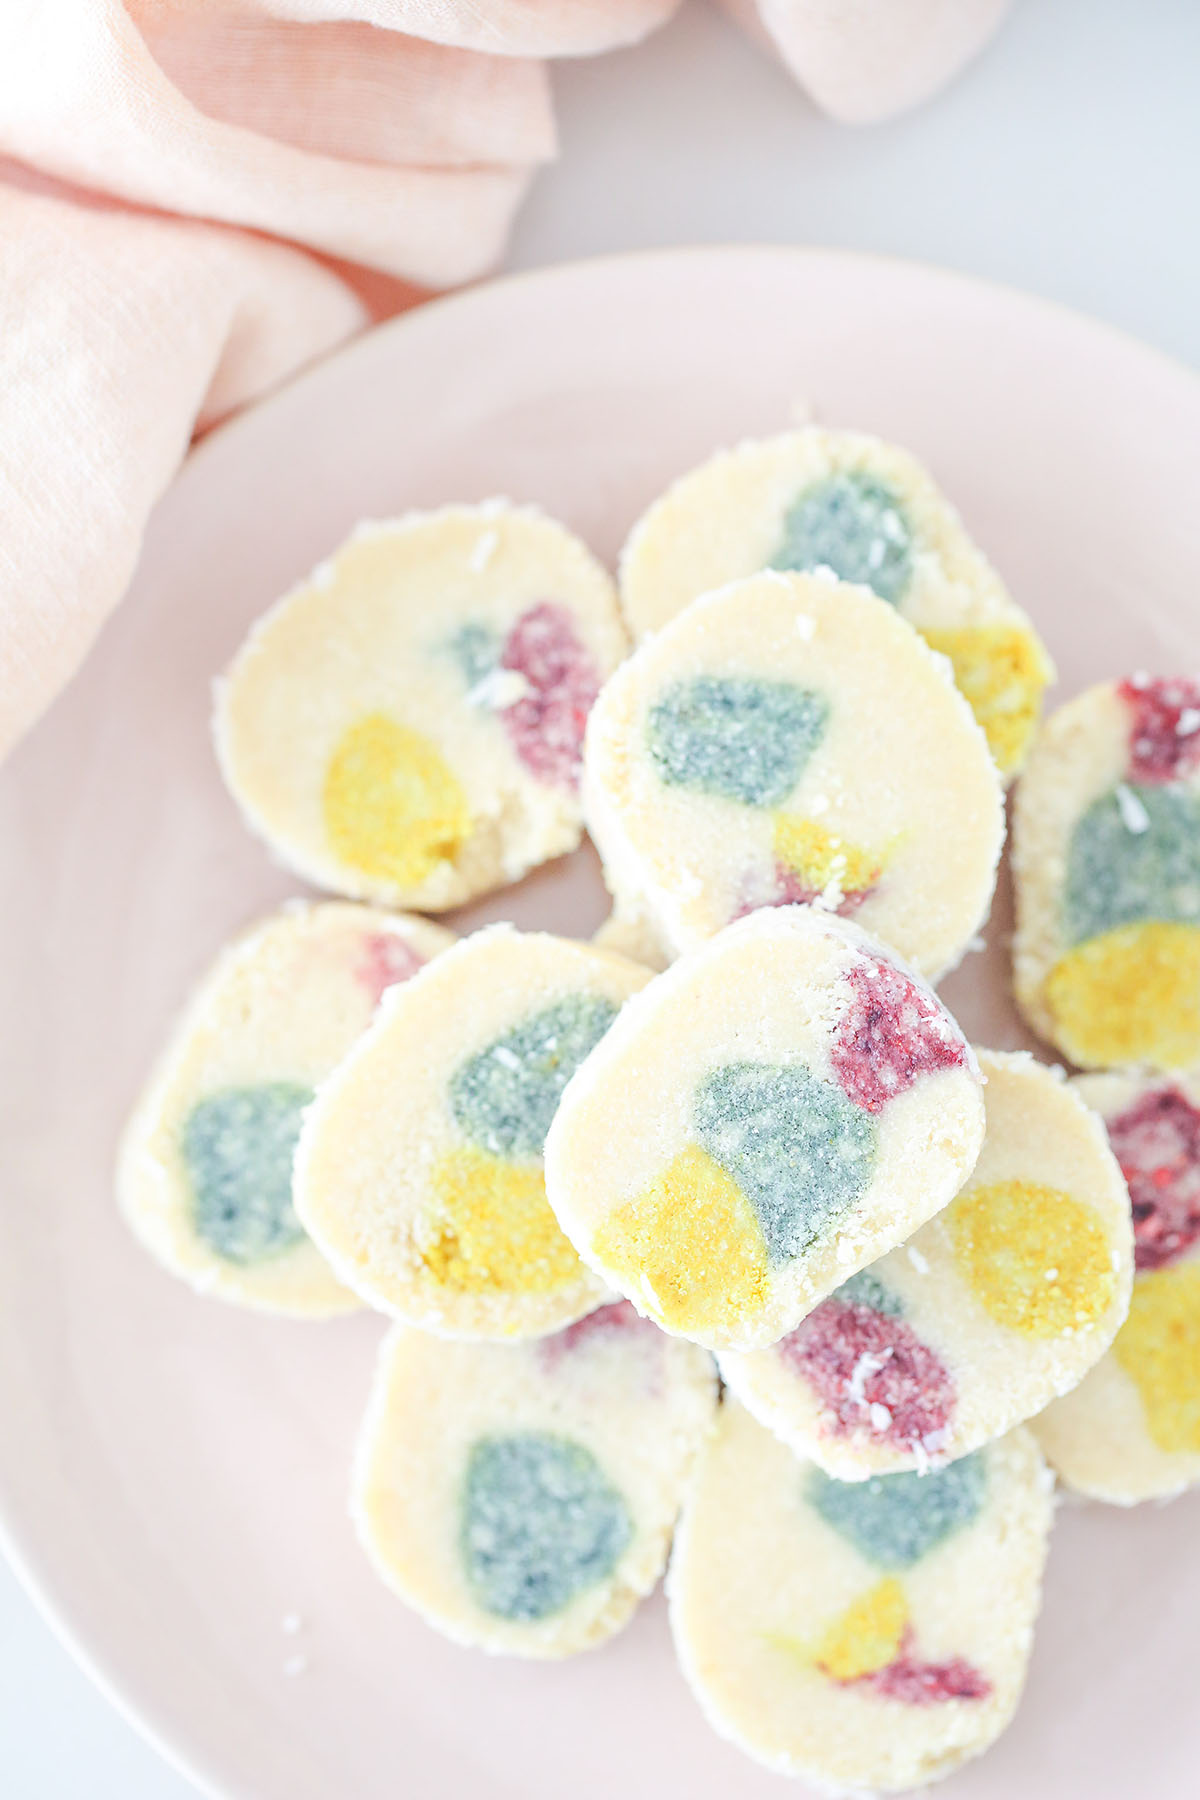 Delicious childhood lolly cake recipe, like your favourite lolly slice or log, but made healthy so friendly for anyone who is plant-based, vegan, gluten free, refined sugar free, low-sugar, paleo or keto!